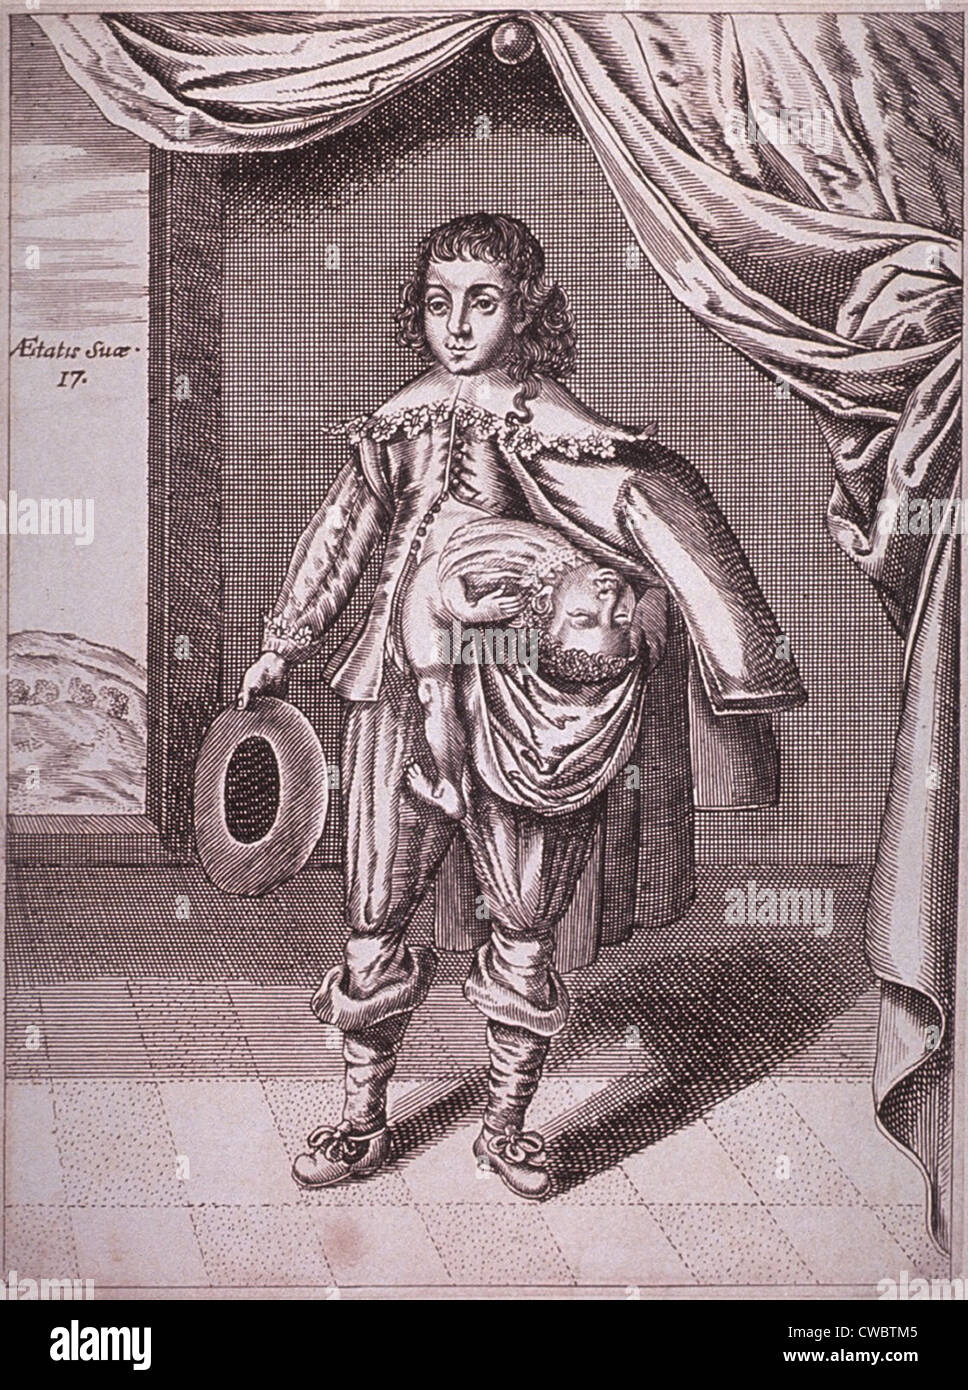 Boy with a deformity caused by a partial conjoined twin growing from his side. 1686 engraving. Stock Photo